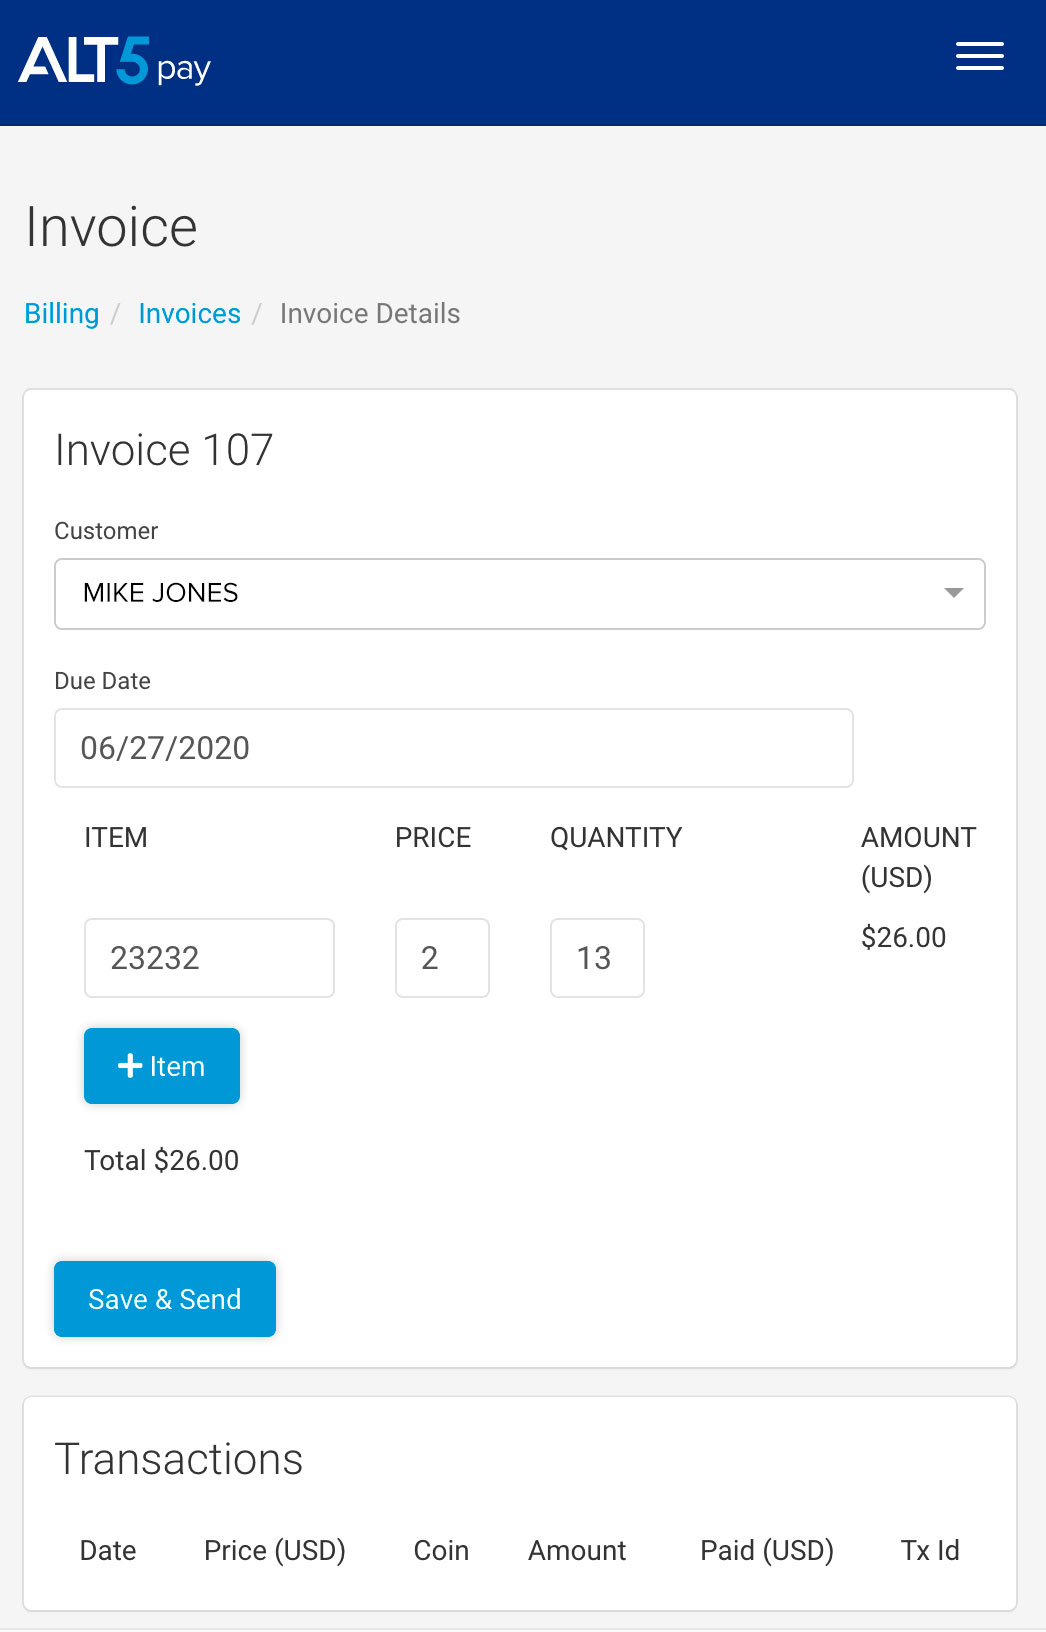 Email Billing Invoice with ALT 5 Pay